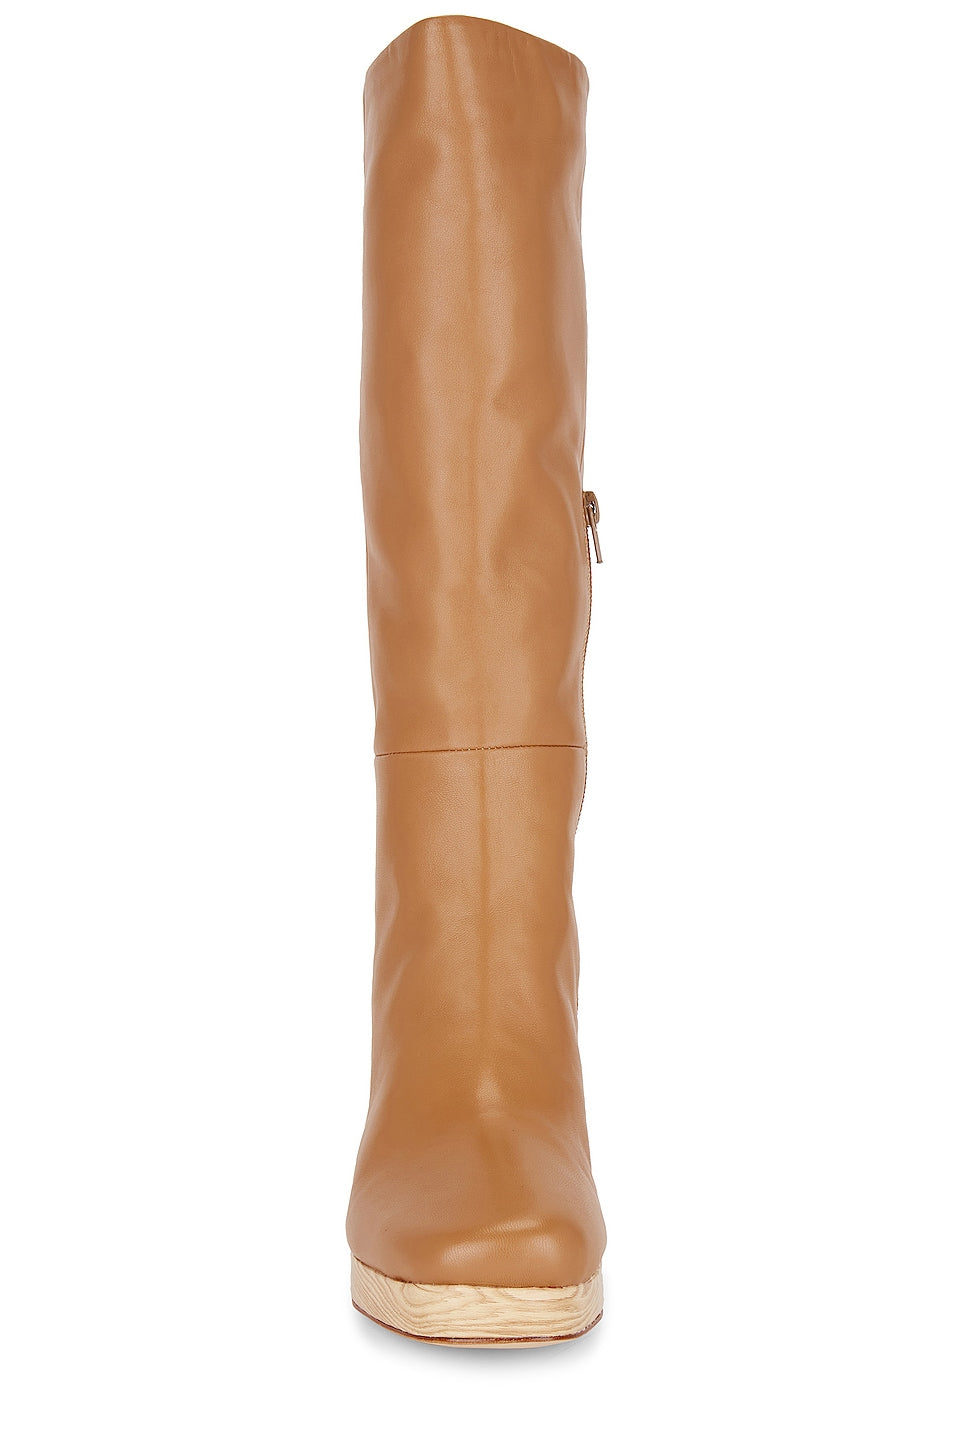 Song of Style Nineties Boot in Tan SIZE 10